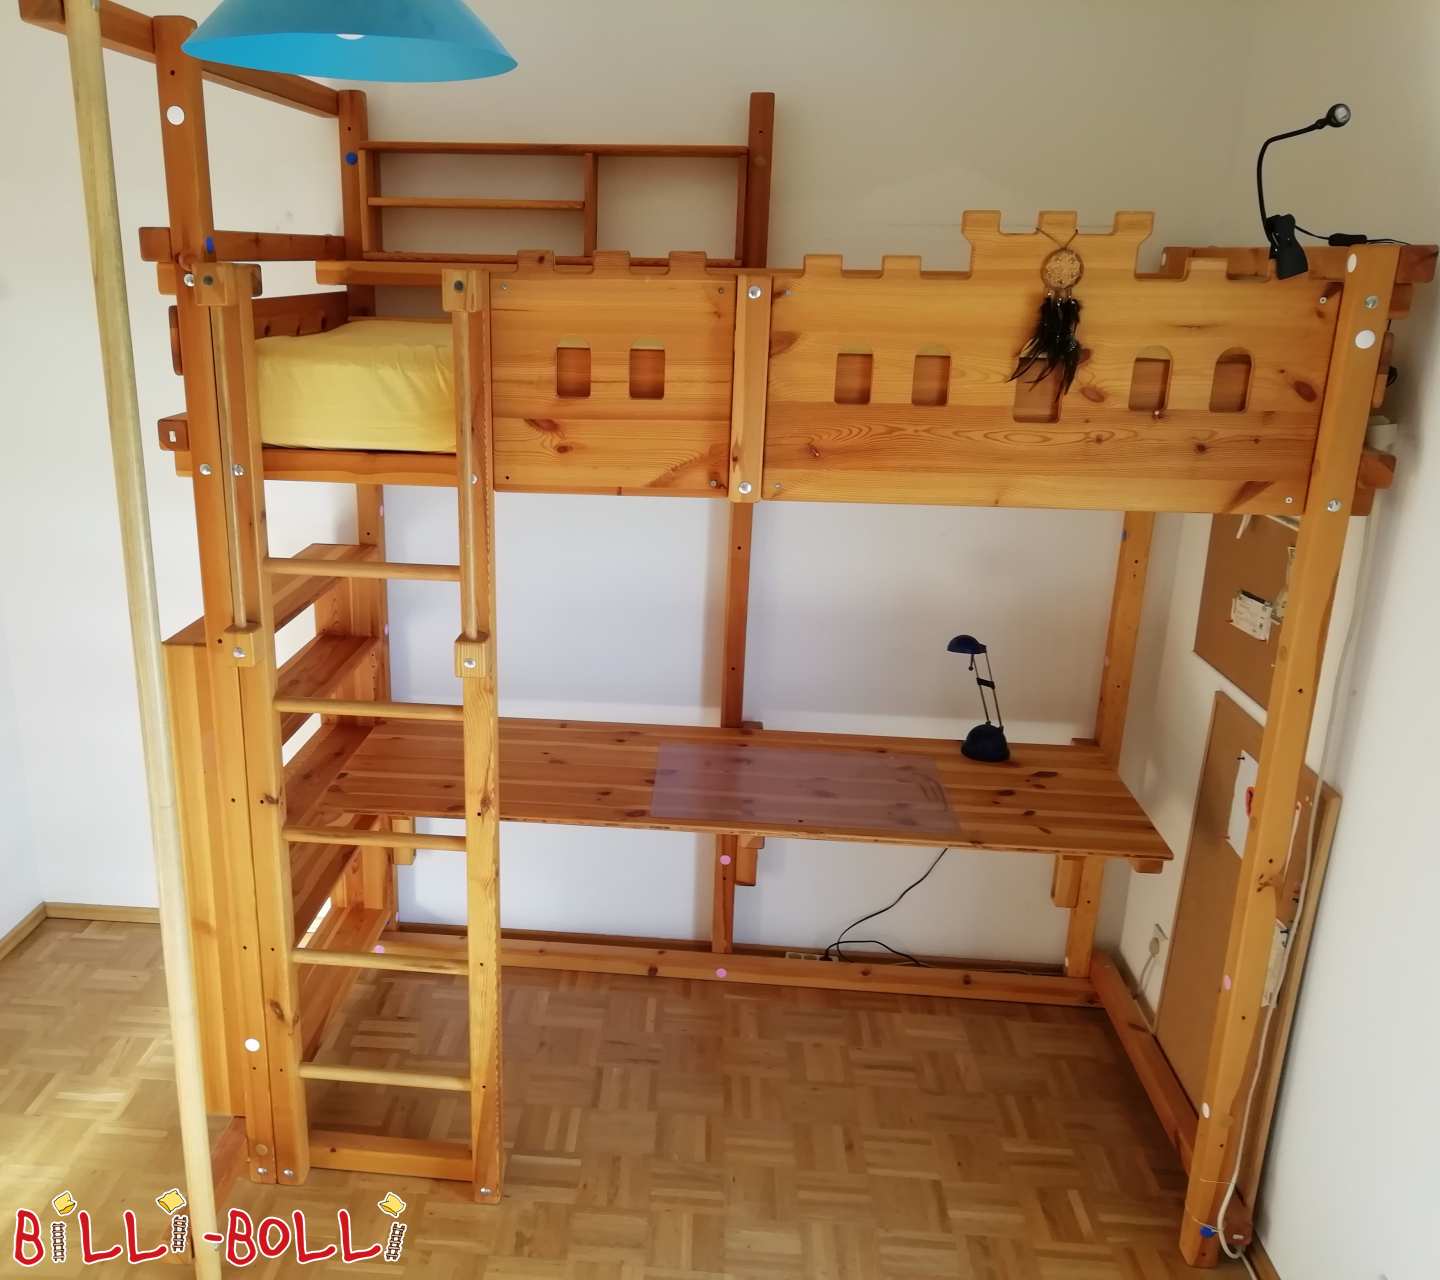 Loft bed incl. fire bar, wall bars and writing plate (Category: second hand loft bed)